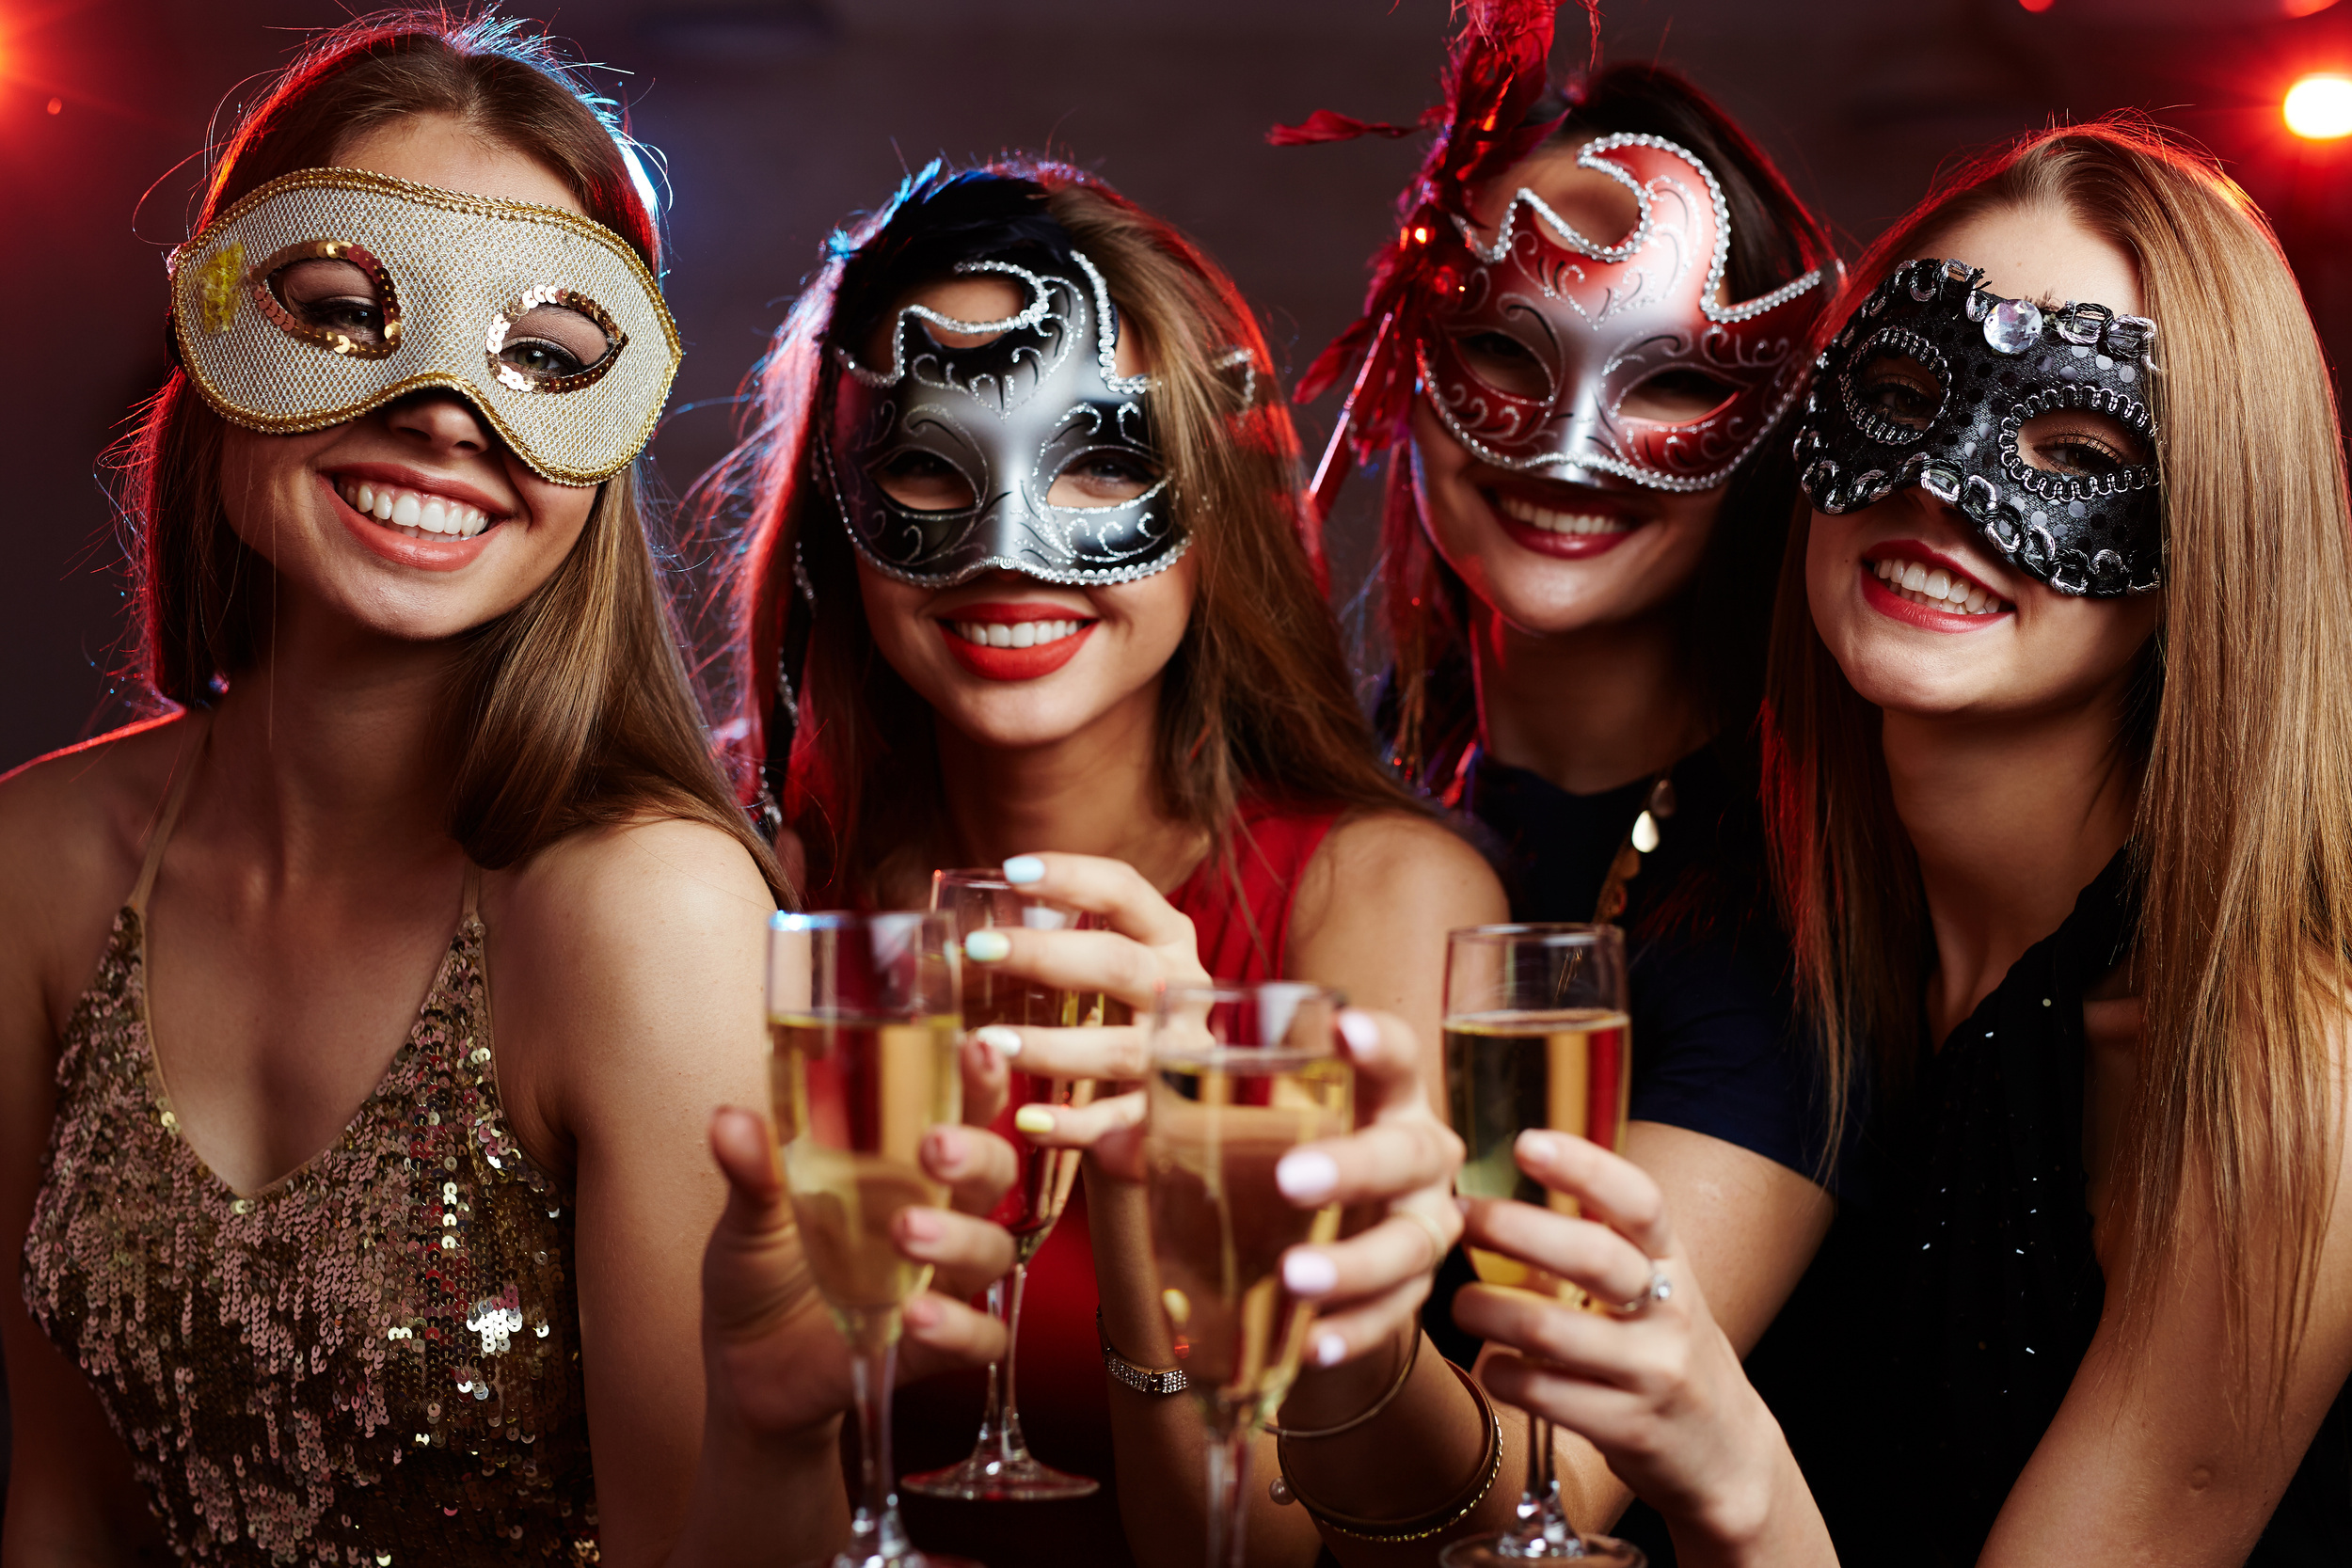 <p>Plenty of bachelorette parties have gone out in wigs. Take the costuming one step further with a masquerade theme. The decor can be dark and mysterious, and all the guests can wear their most alluring eye mask. It'll be totally unique and loads of fun. </p><p>You may also like: <a href='https://www.yardbarker.com/lifestyle/articles/people_swear_by_these_20_easy_fitness_hacks_032024/s1__40061440'>People swear by these 20 easy fitness hacks</a></p>